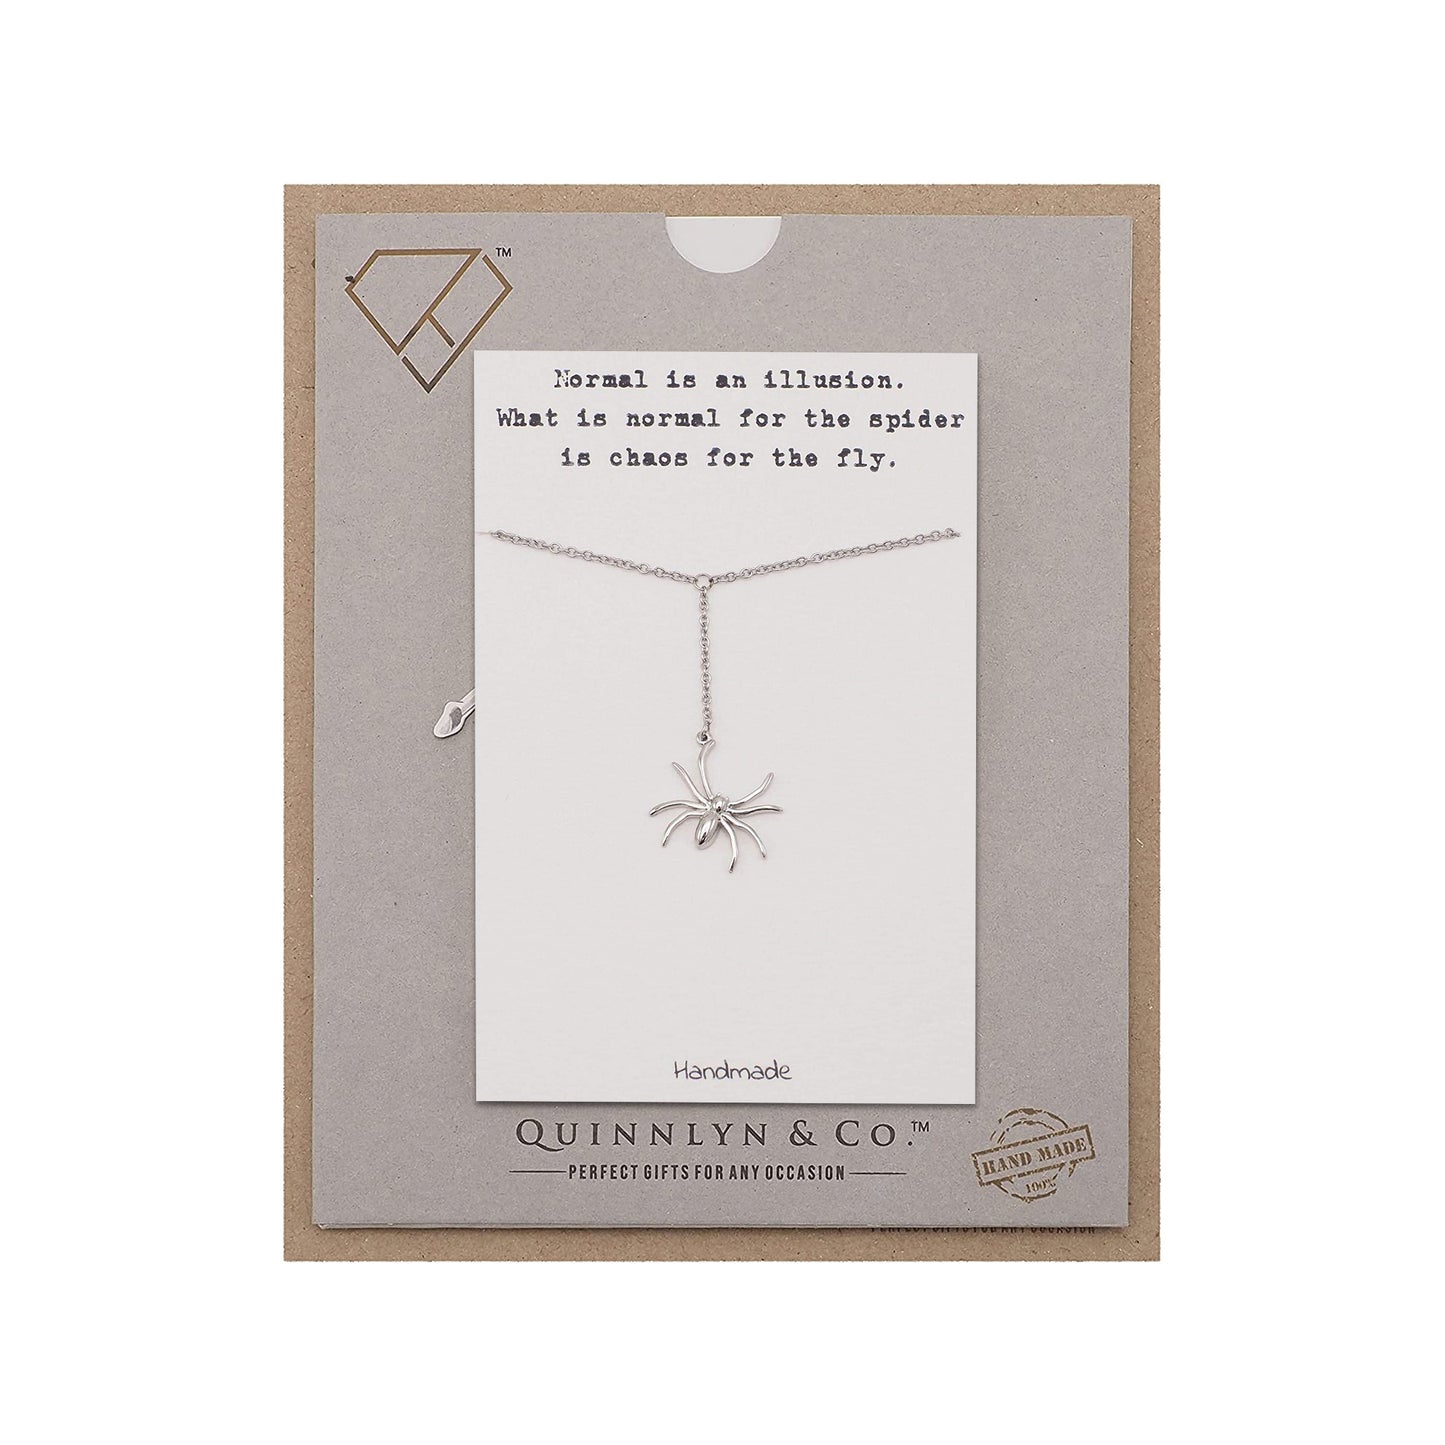 Quinnlyn & Co. Hanging Spiderman Pendant Necklace, Gifts for Women with Inspirational Quote on Greeting Card